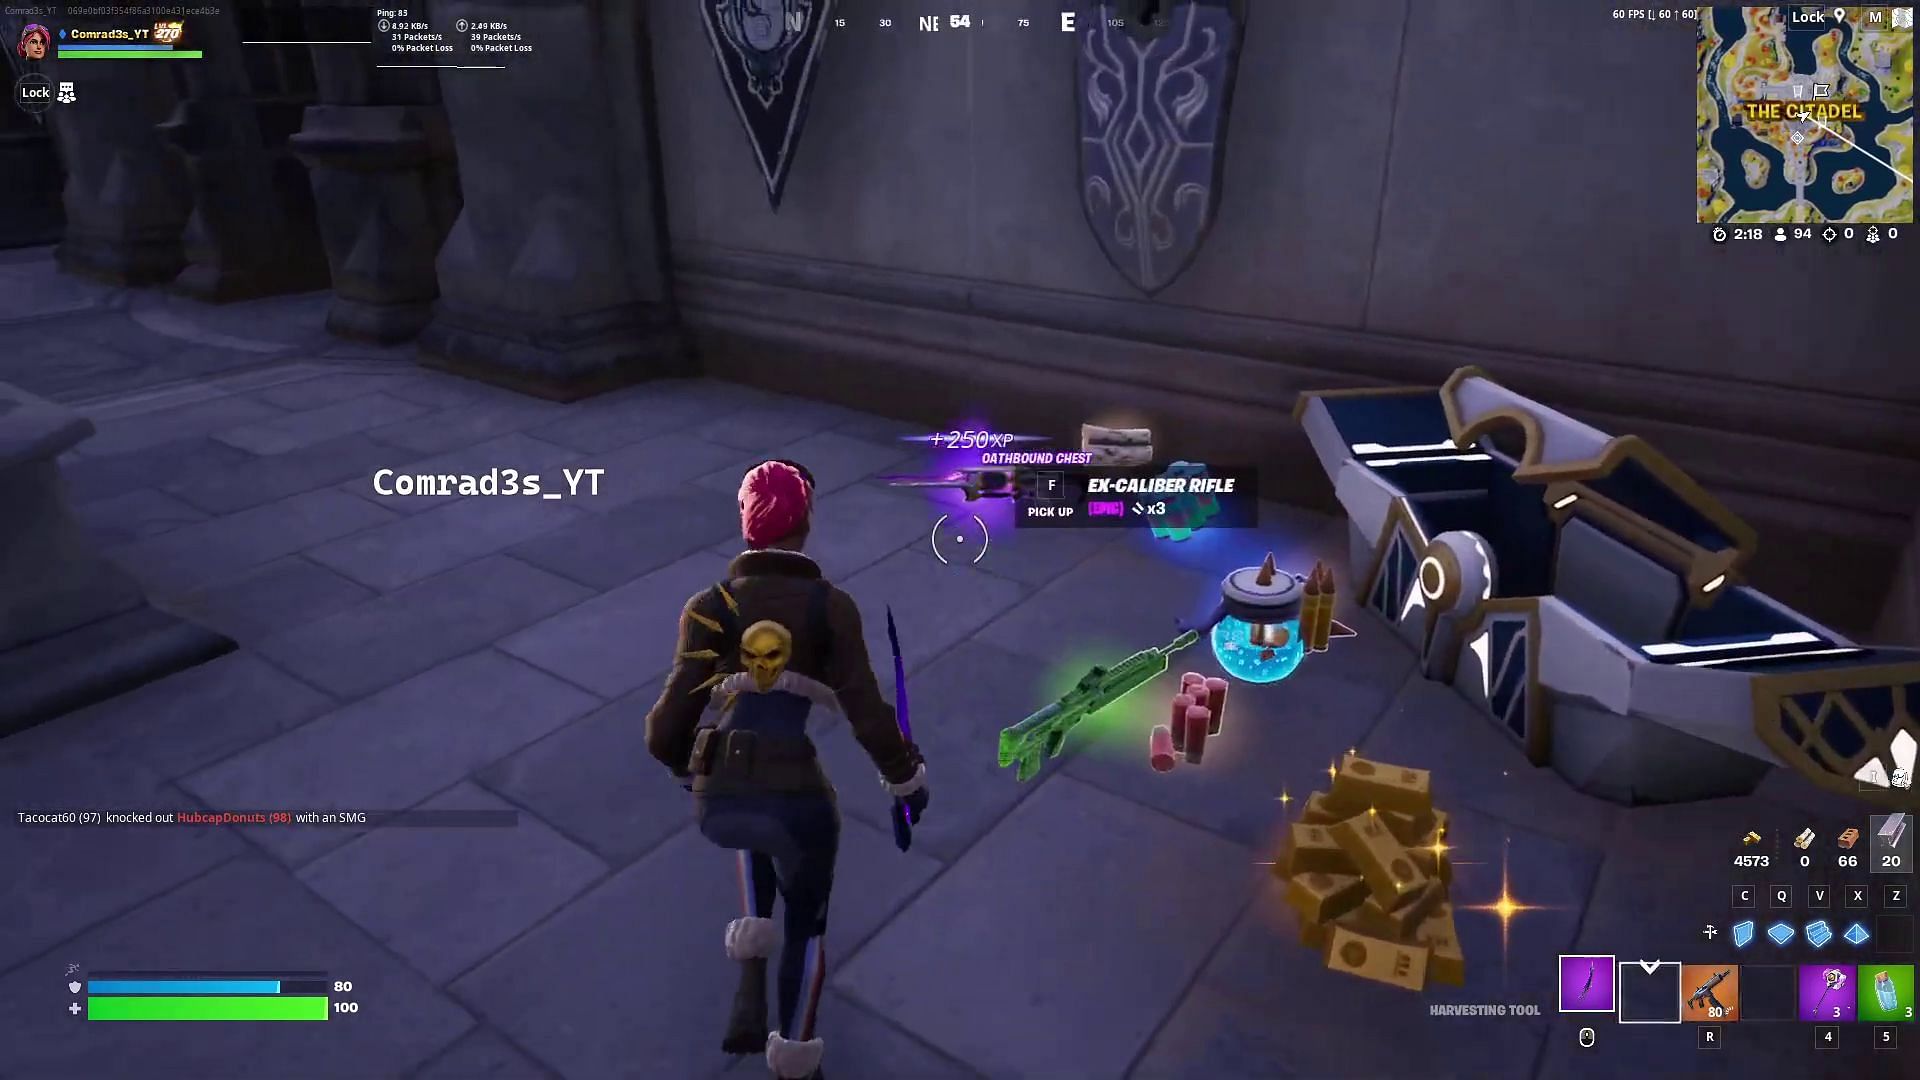 Open the Oathbound Chest. (Image via YouTube/Comrad3s)